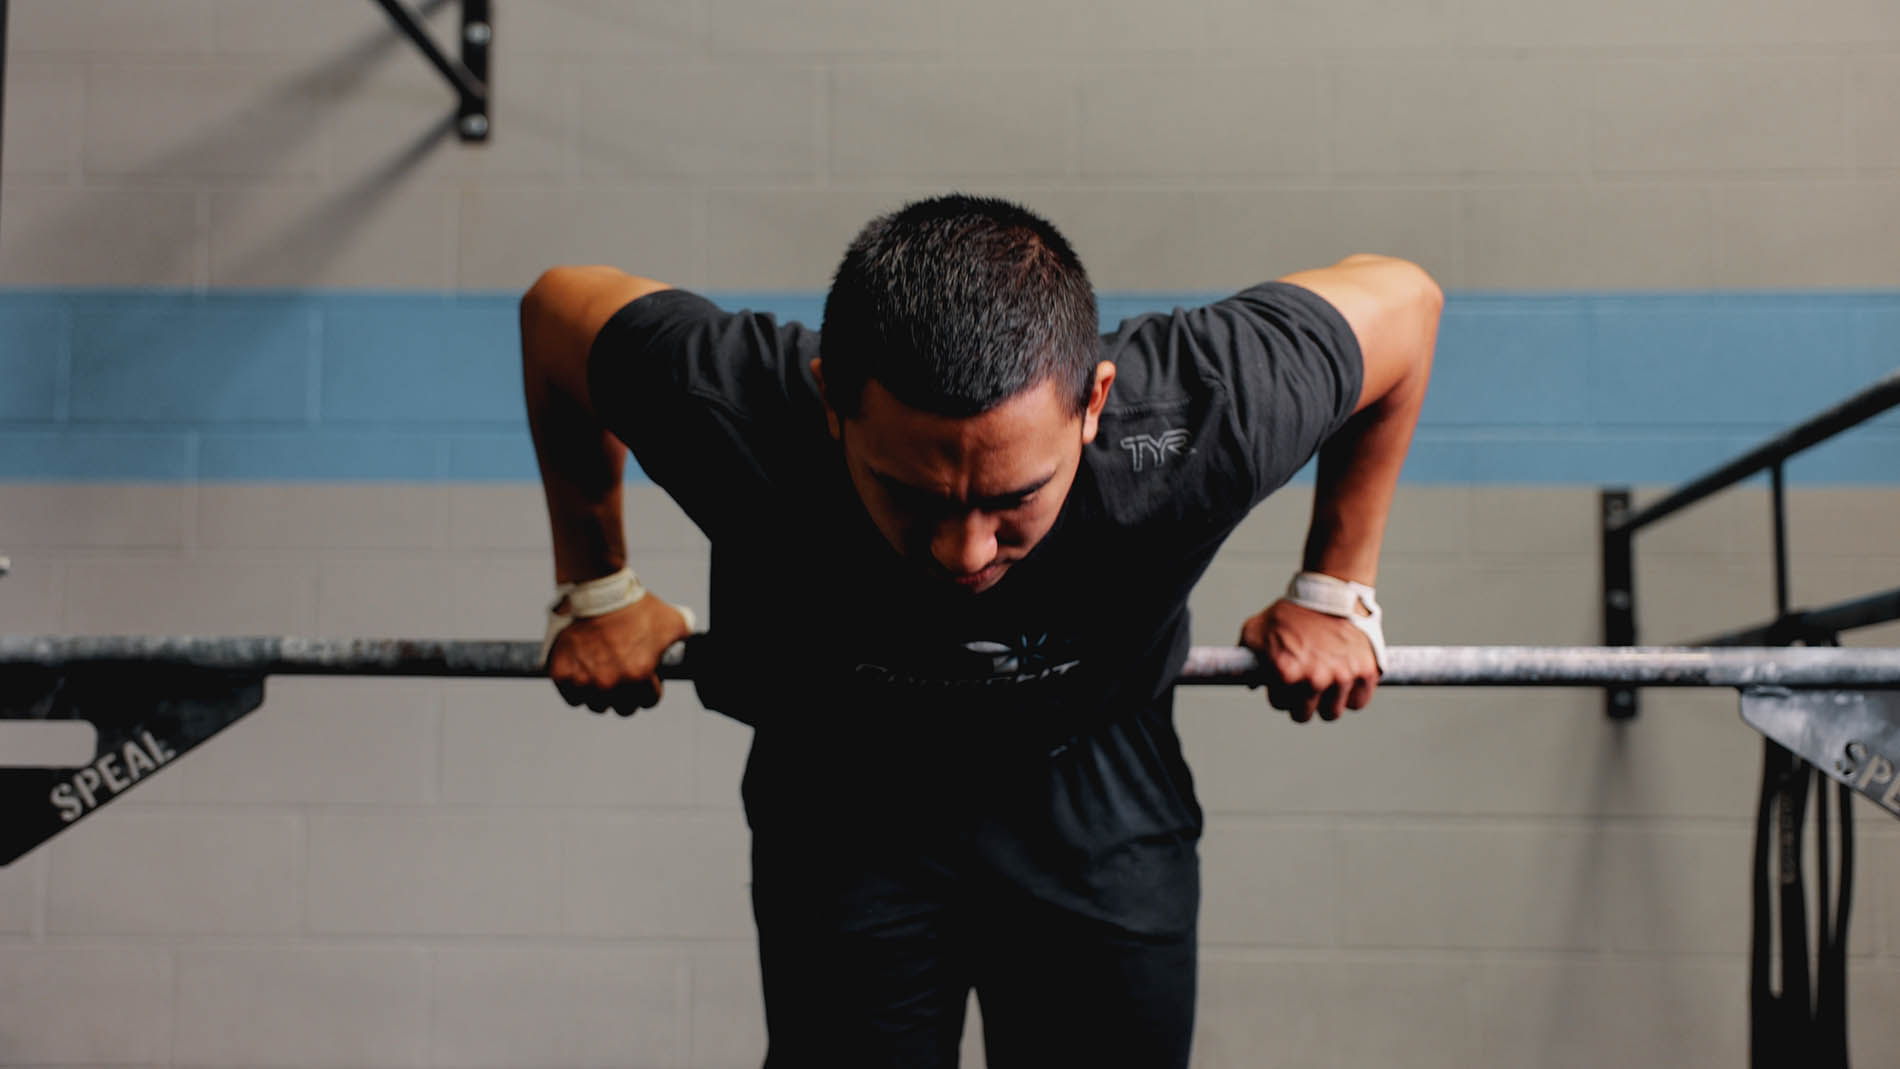 A focused man doing a dip exercise at a gym, gripping parallel bars, wearing a black t-shirt and wristbands for pelvic health support.